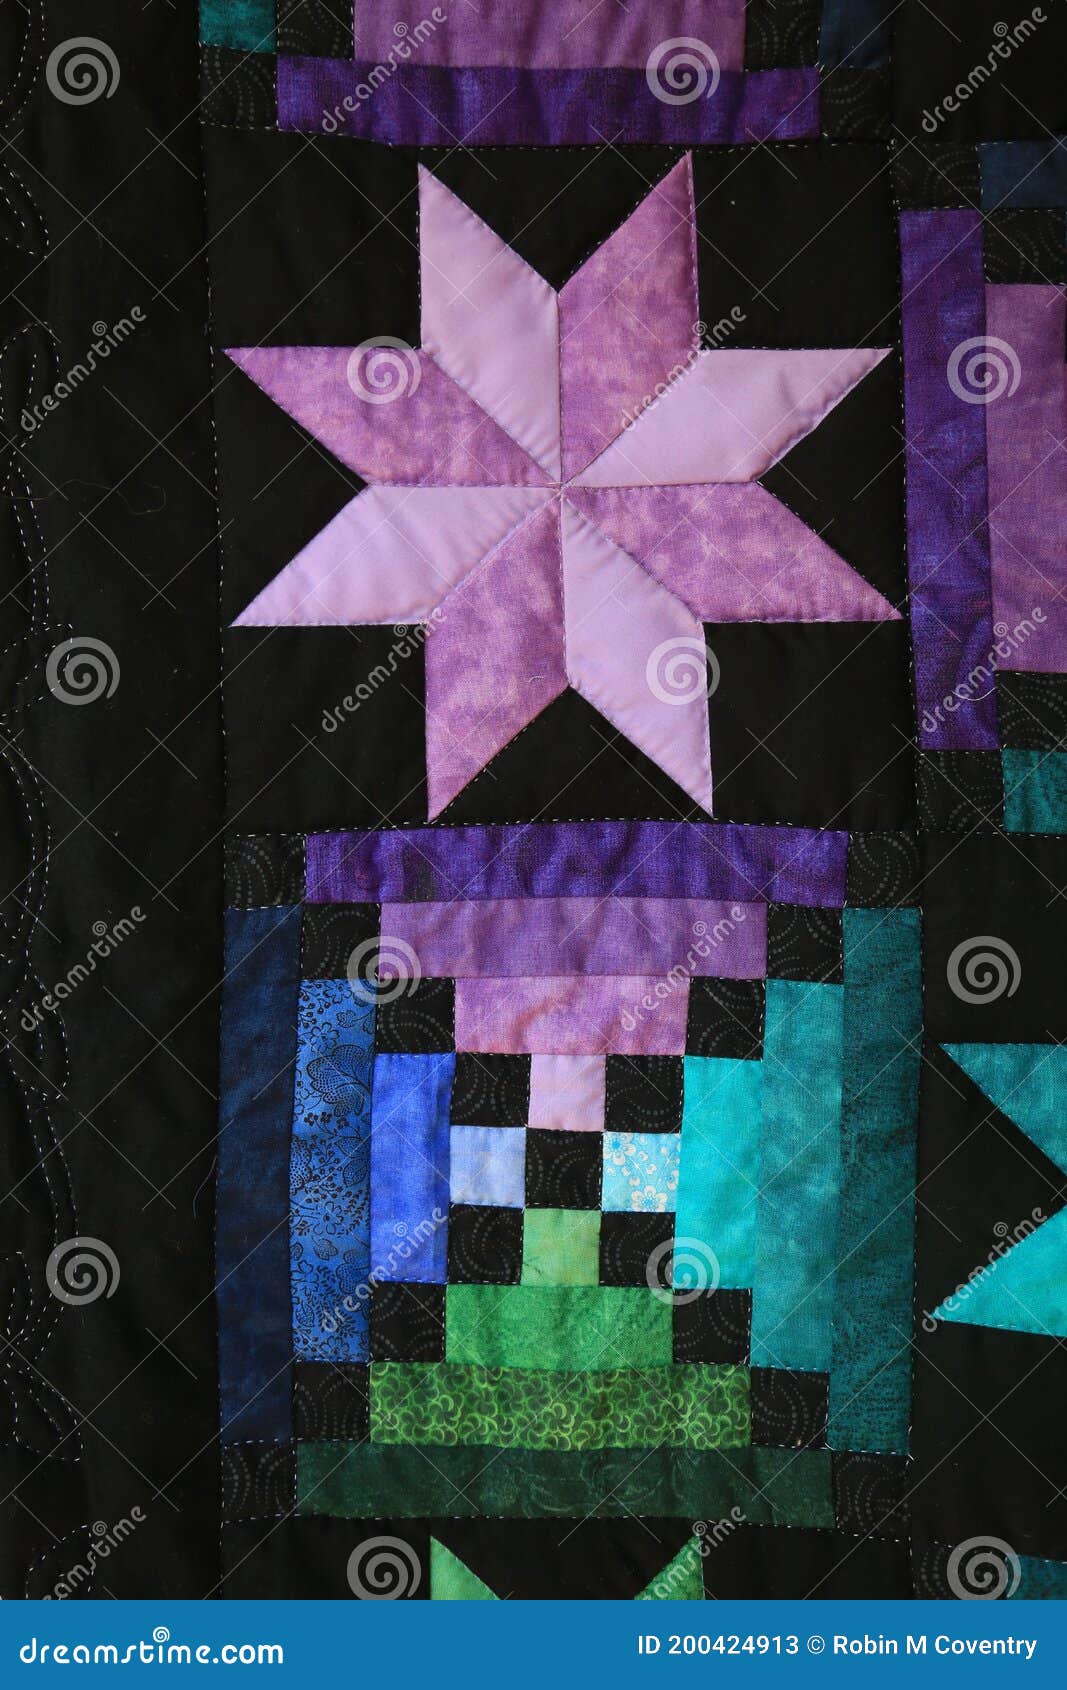 Beautiful Quilts with black background Images and videos for your projects